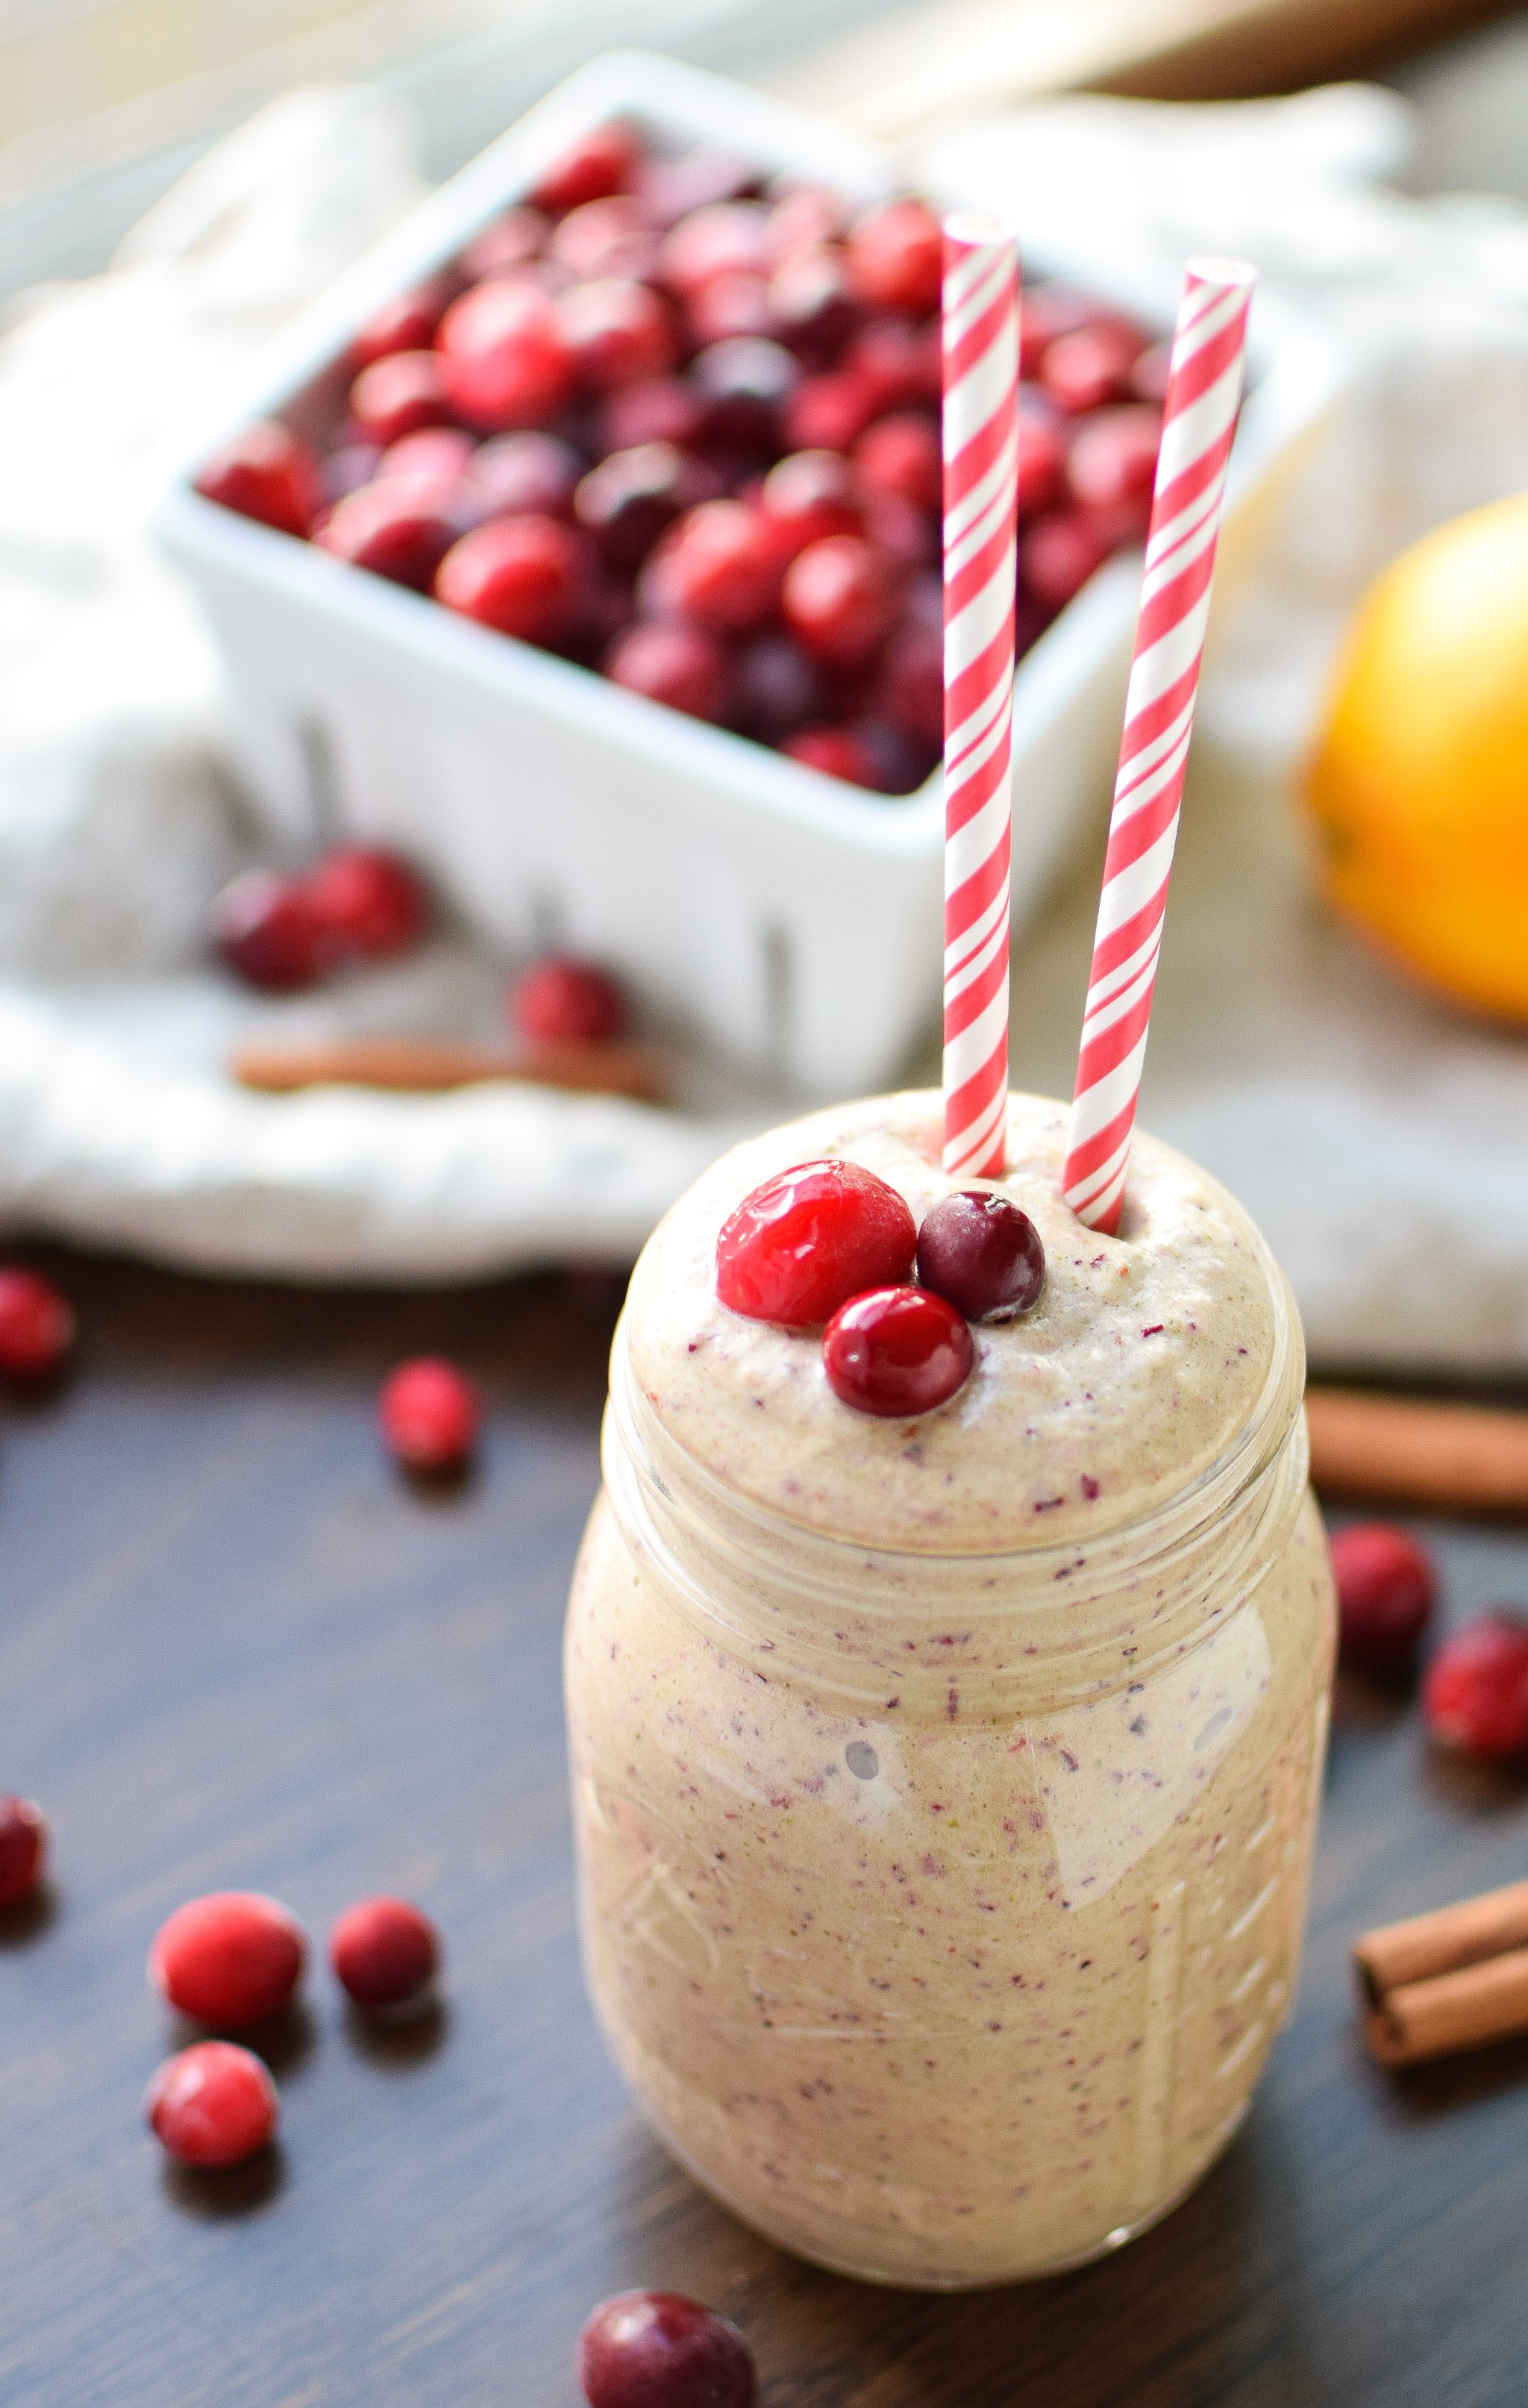 Orange Cranberry Greens Protein Smoothie recipe - You MUST try this new smoothie with happy Fall flavors - orange, cranberry, and CINNAMON make this creamy breakfast (or lunch!) complete! - ProjectMealPlan.com